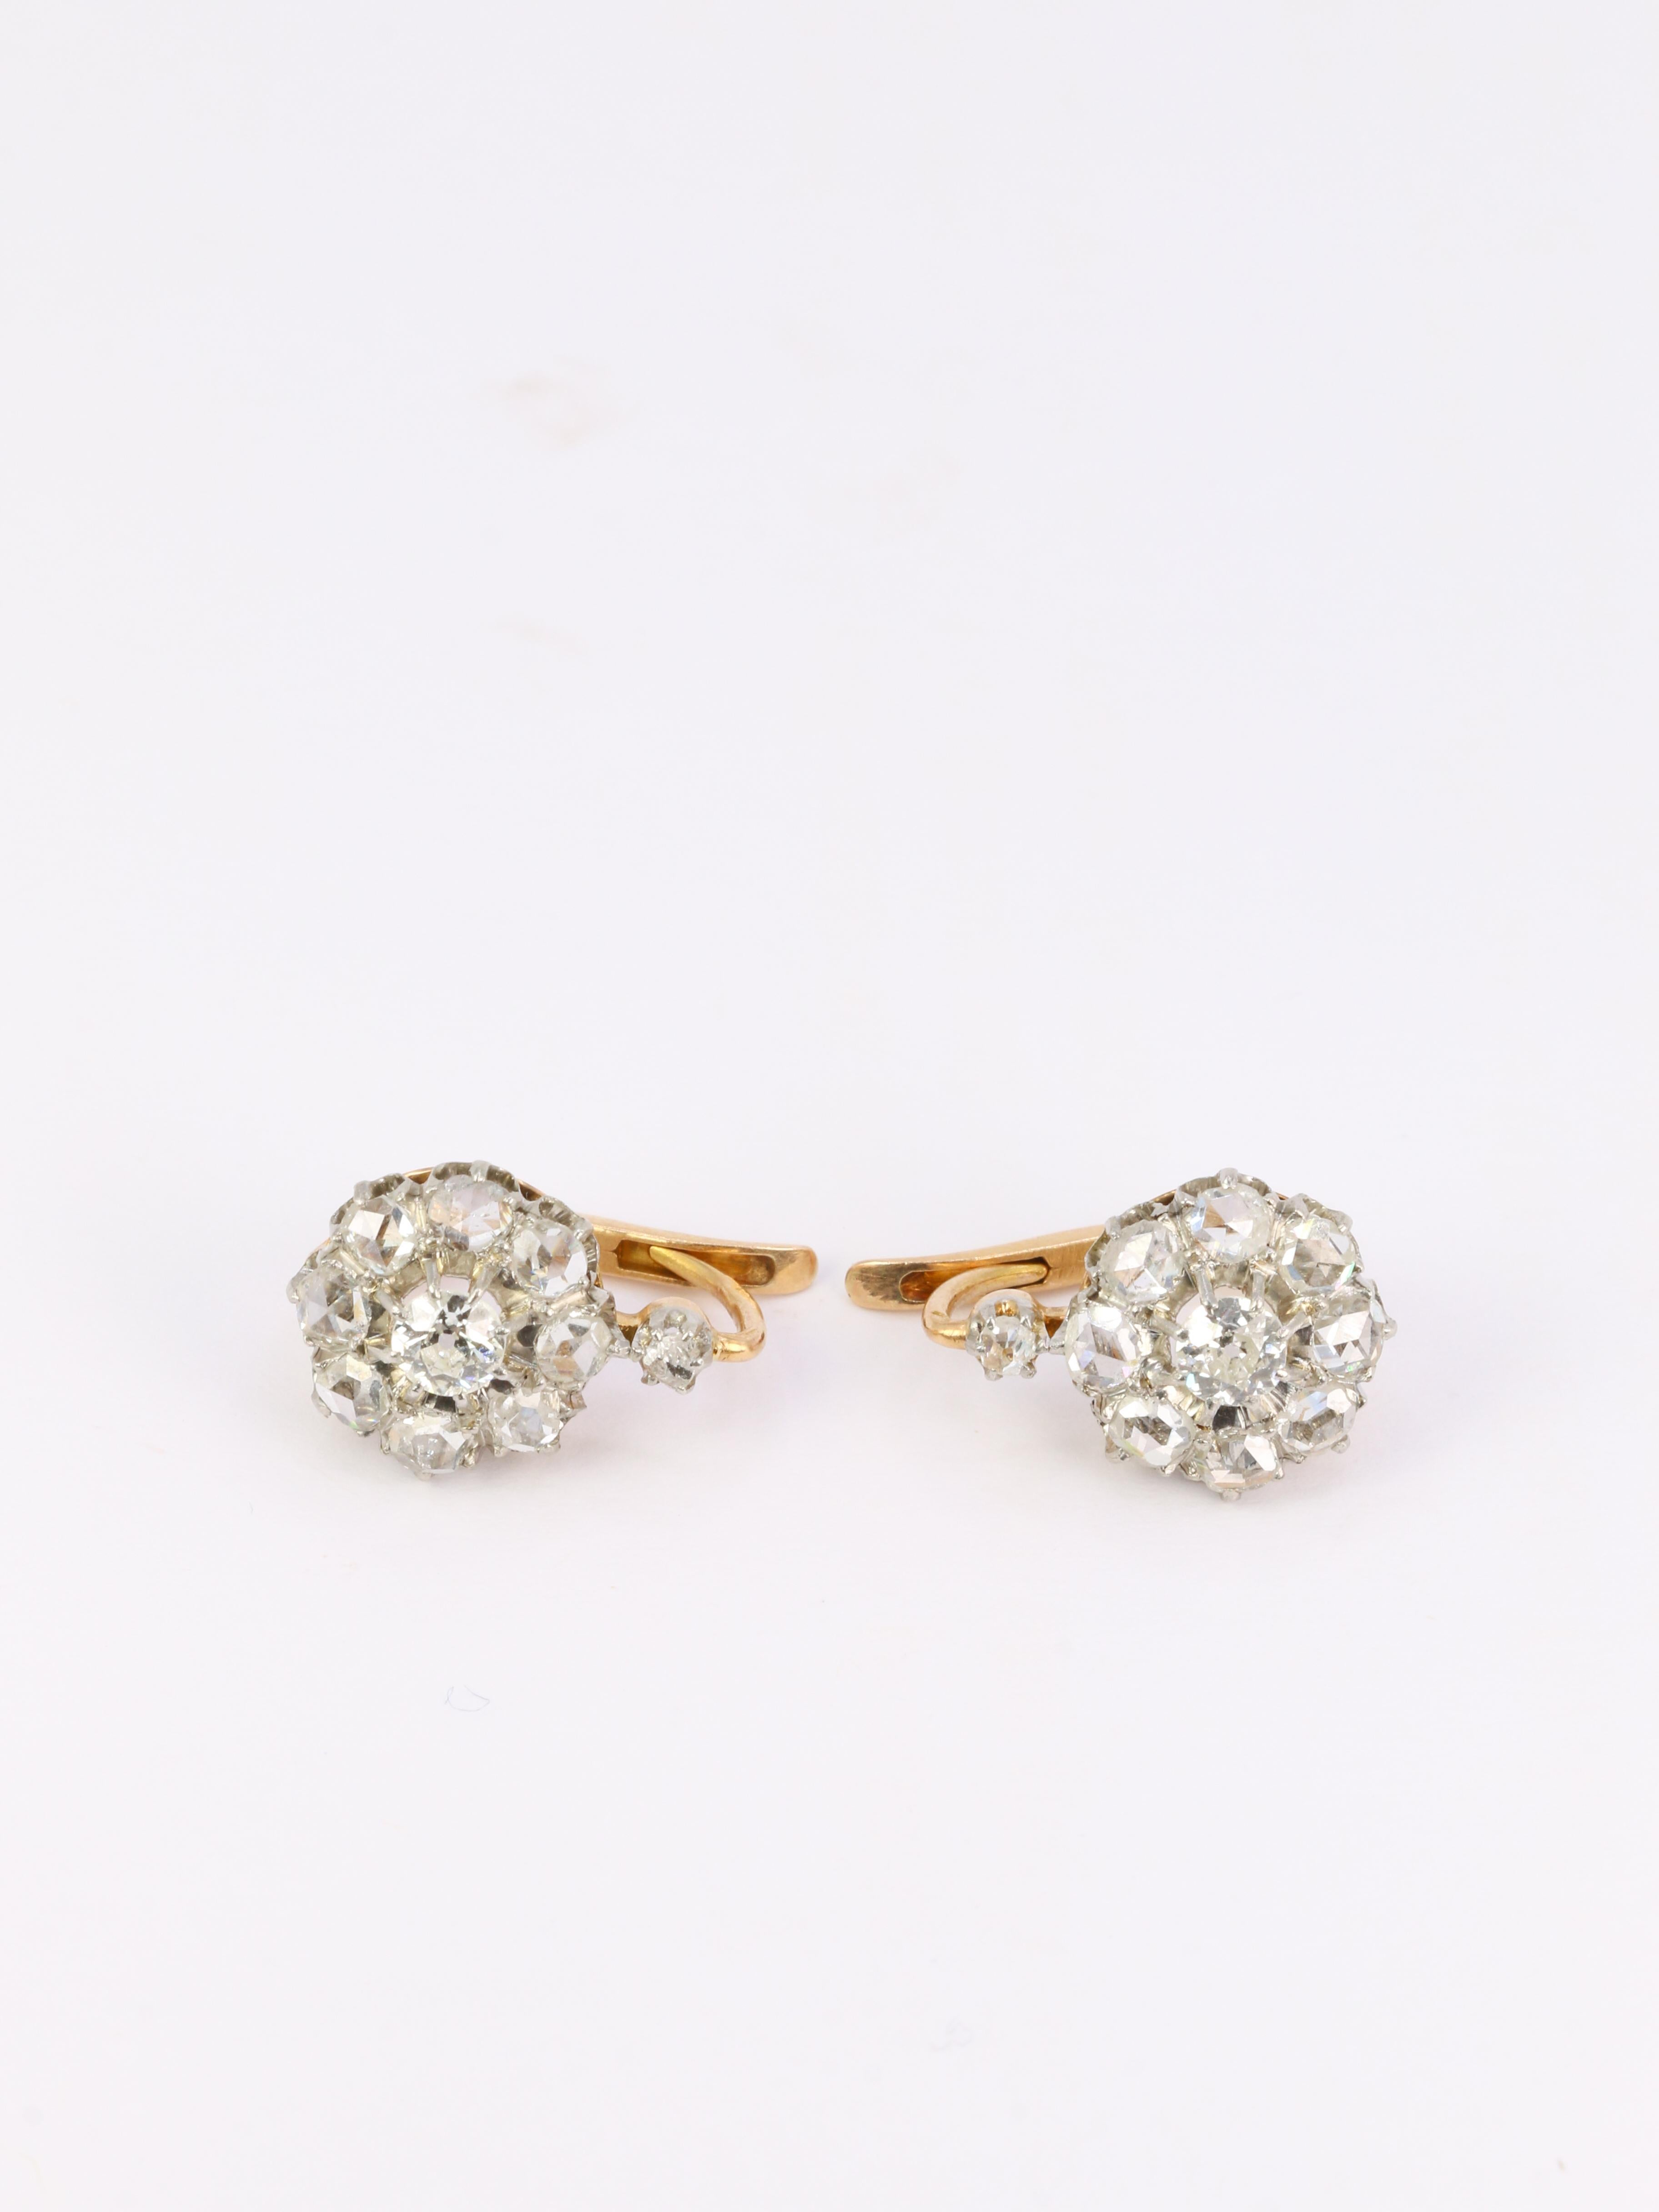 Women's Antique gold and silver earrings set with old mine cut diamonds